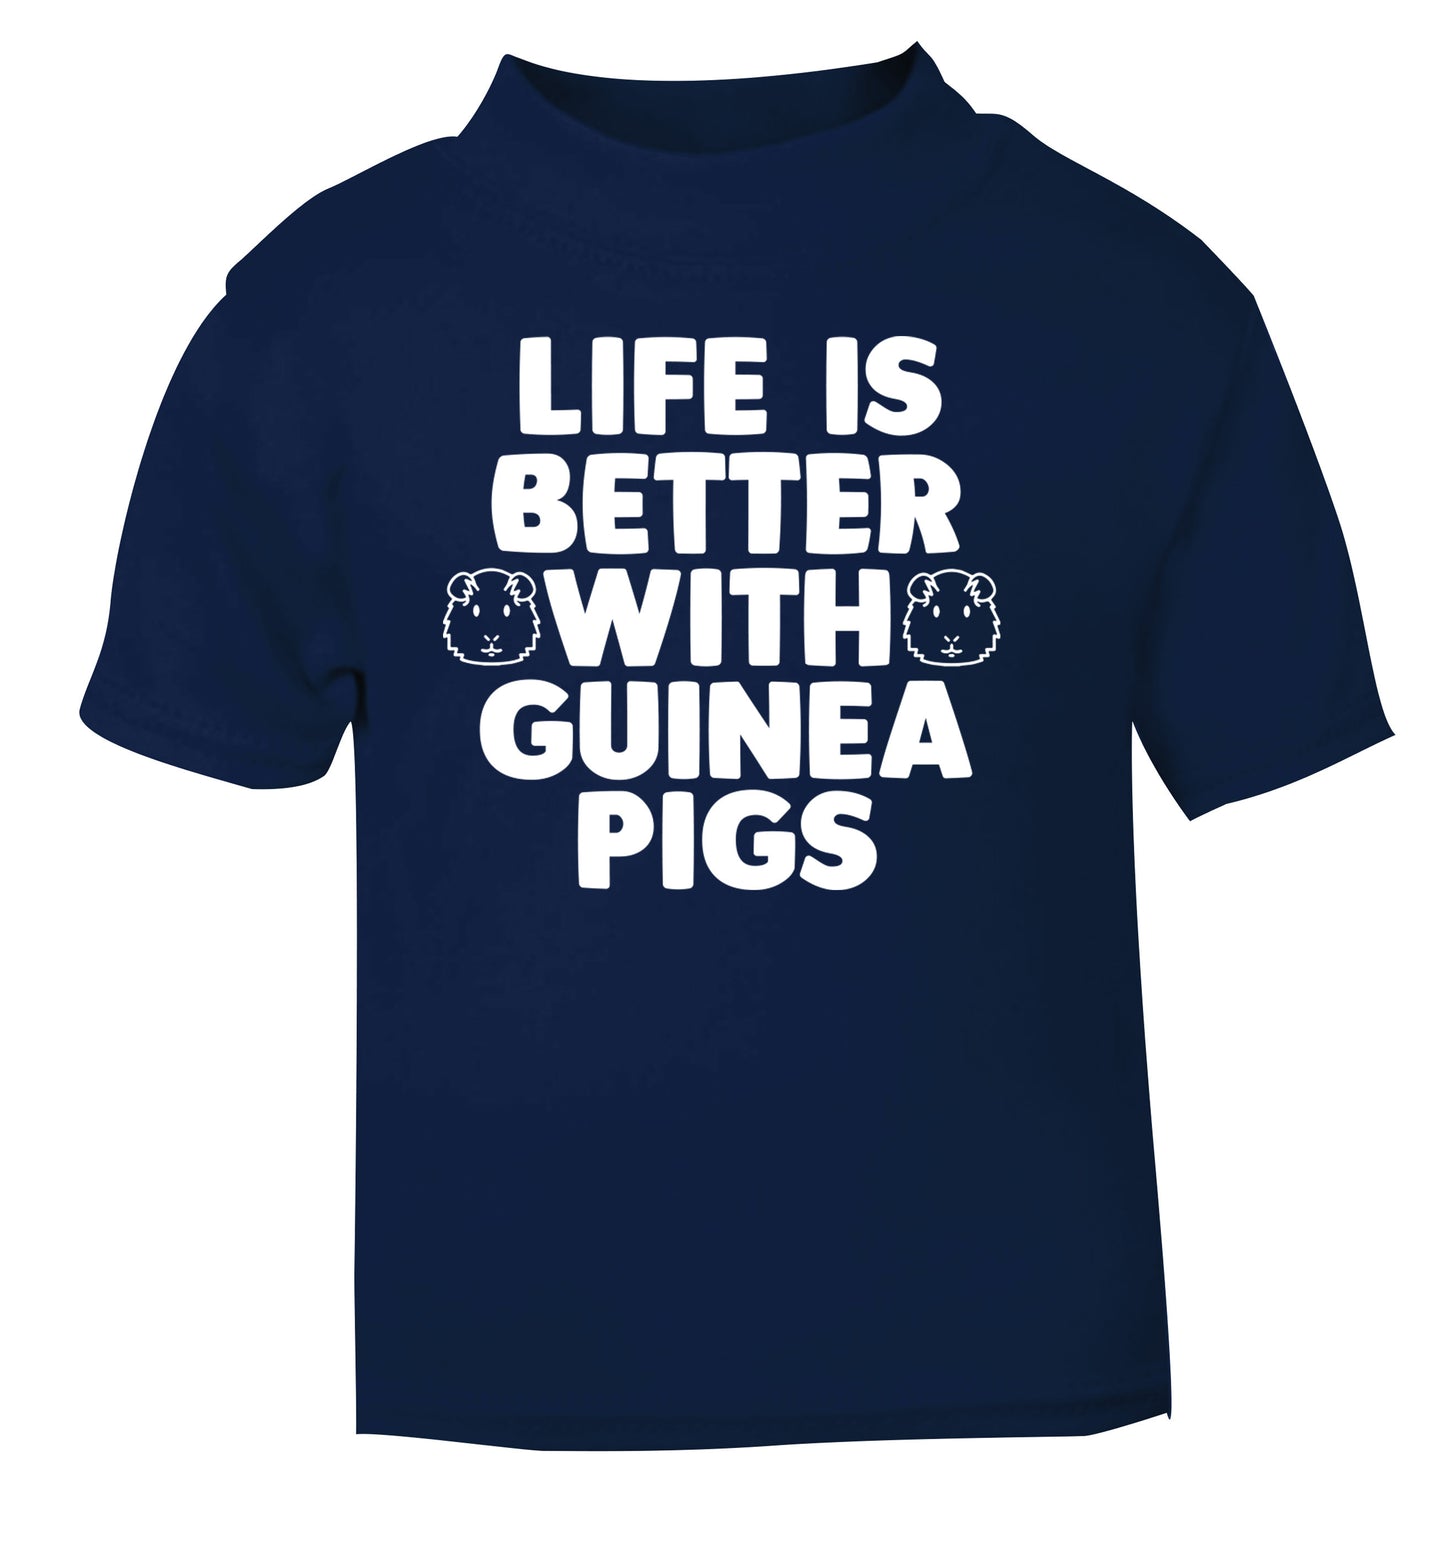 Life is better with guinea pigs navy Baby Toddler Tshirt 2 Years